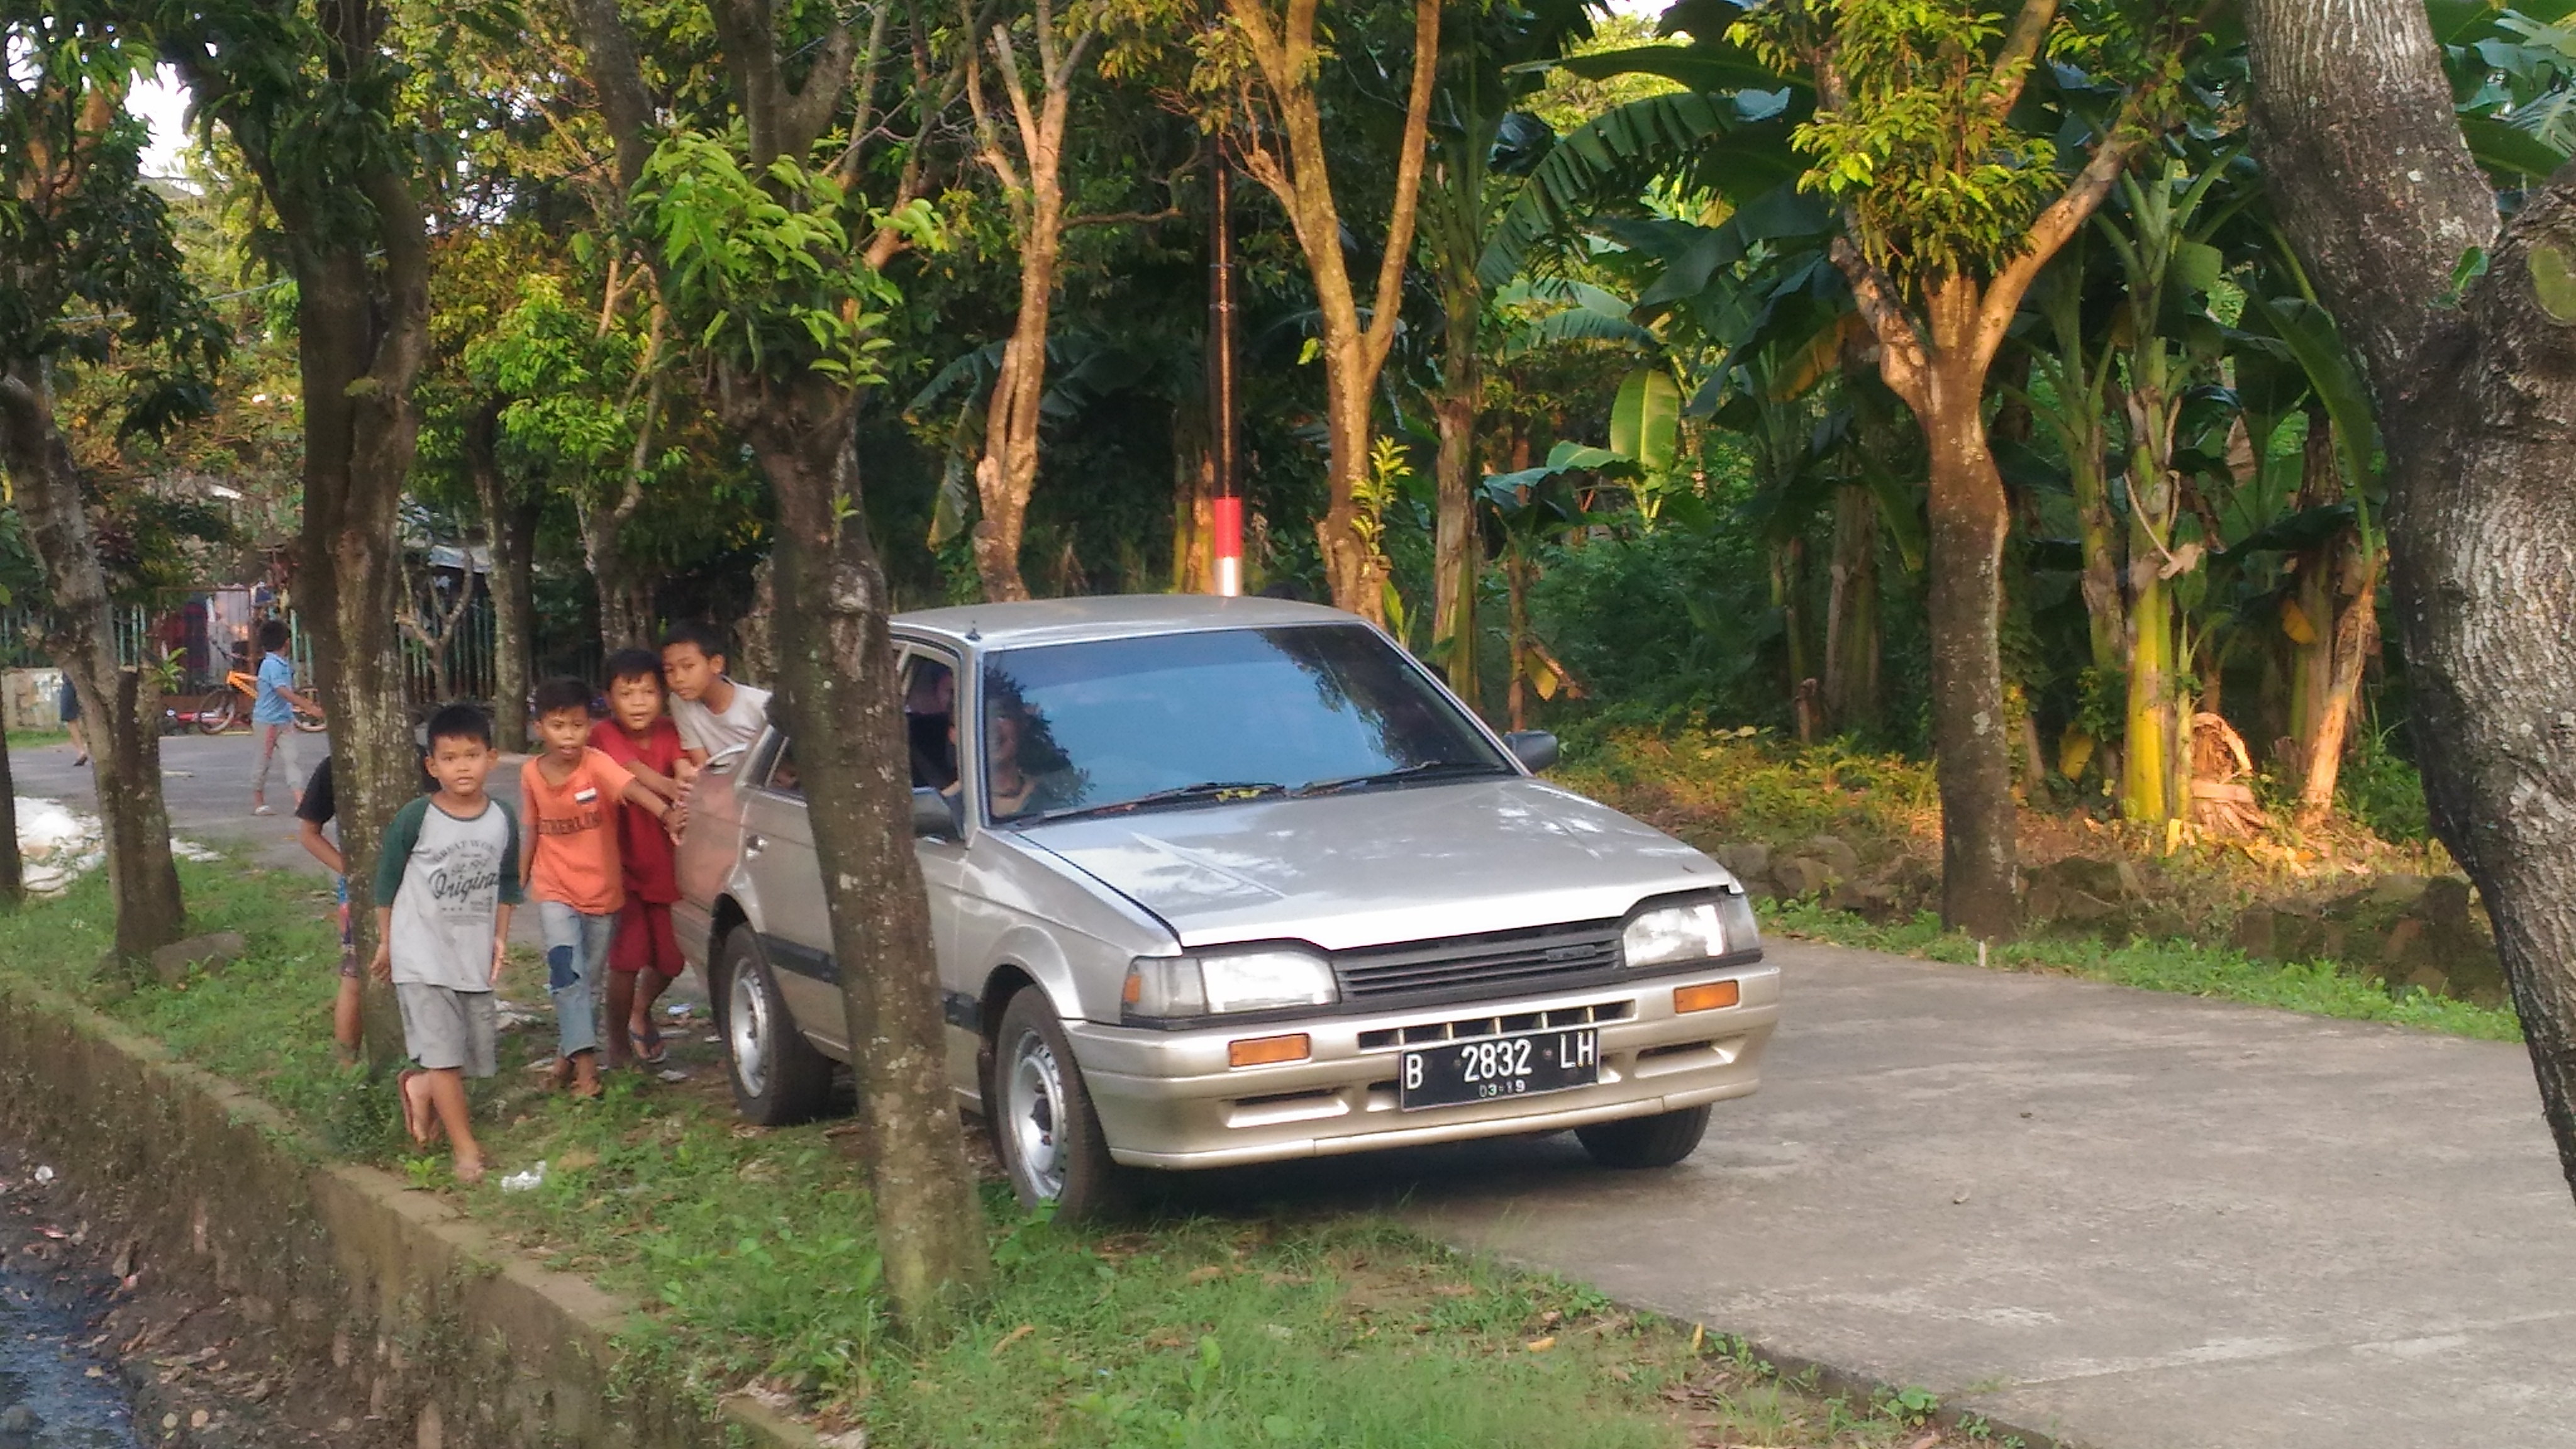 You will see quite a bit of kids on the street, just like India. Here they are pushing a car.